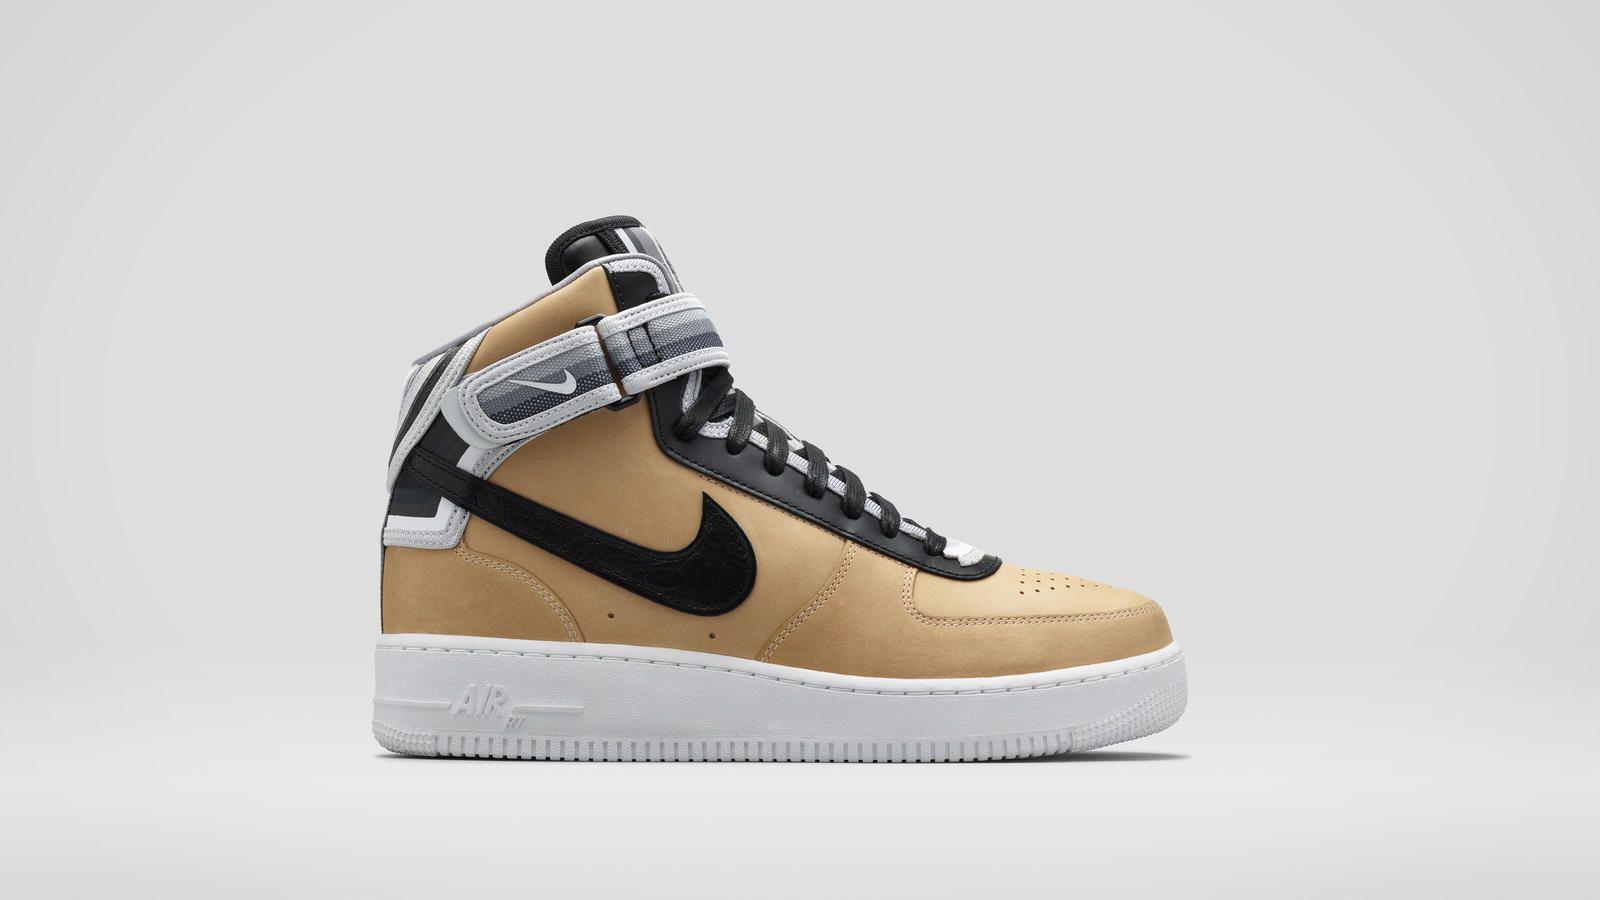 Nike Shoes with the Triangle Logo - Triangle Offense: The Third And Final Nike + R.T. Air Force 1 ...